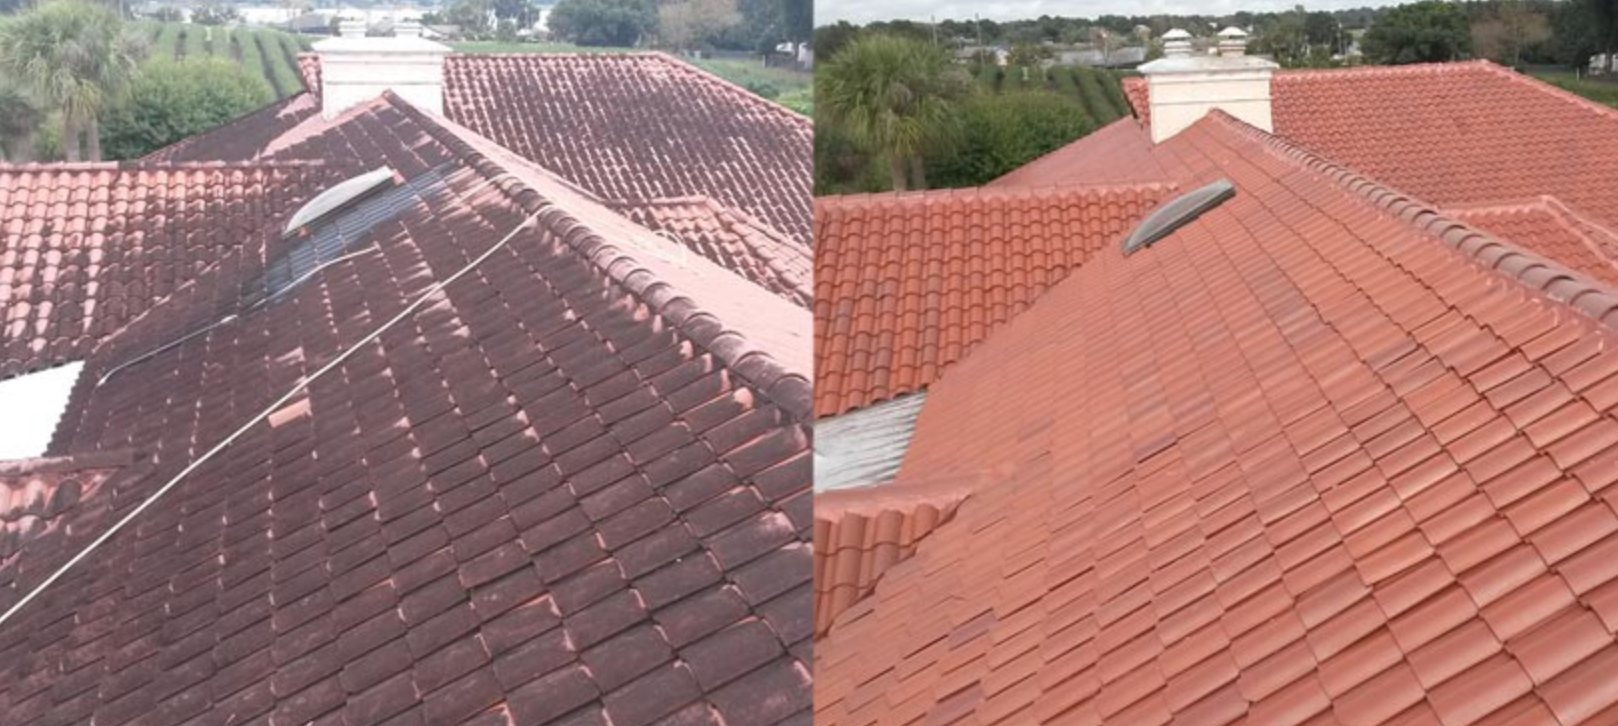 How To Clean Dirty Roof Tiles